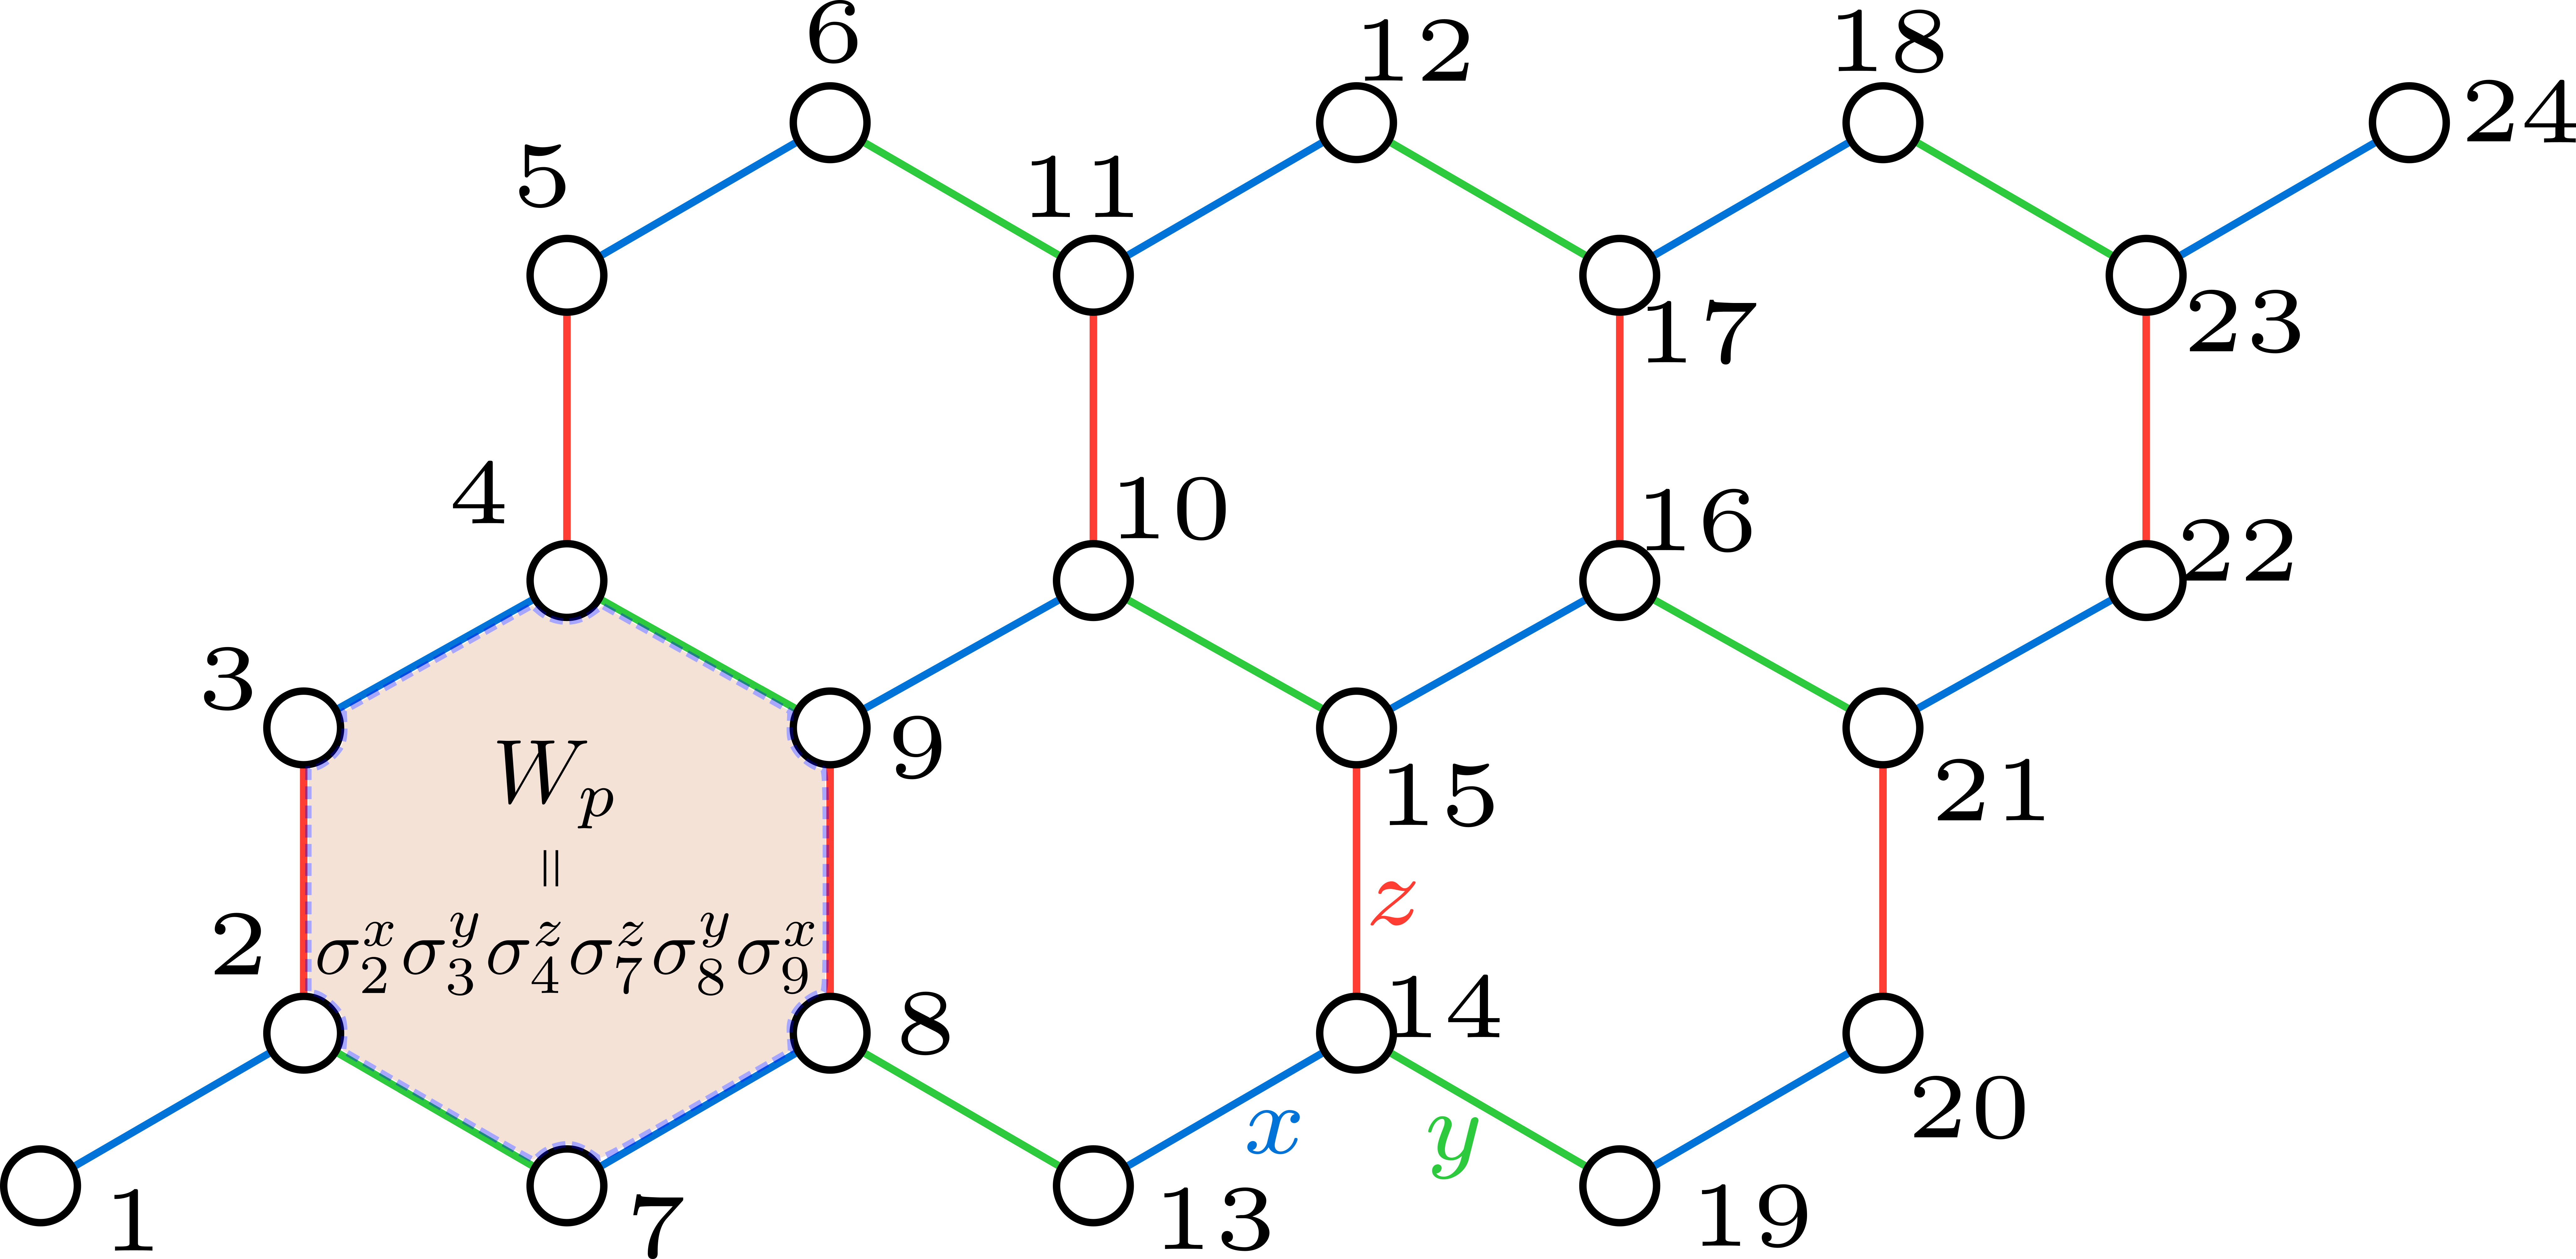 Wp consists of the 6 sites on the boundary of the shaded region